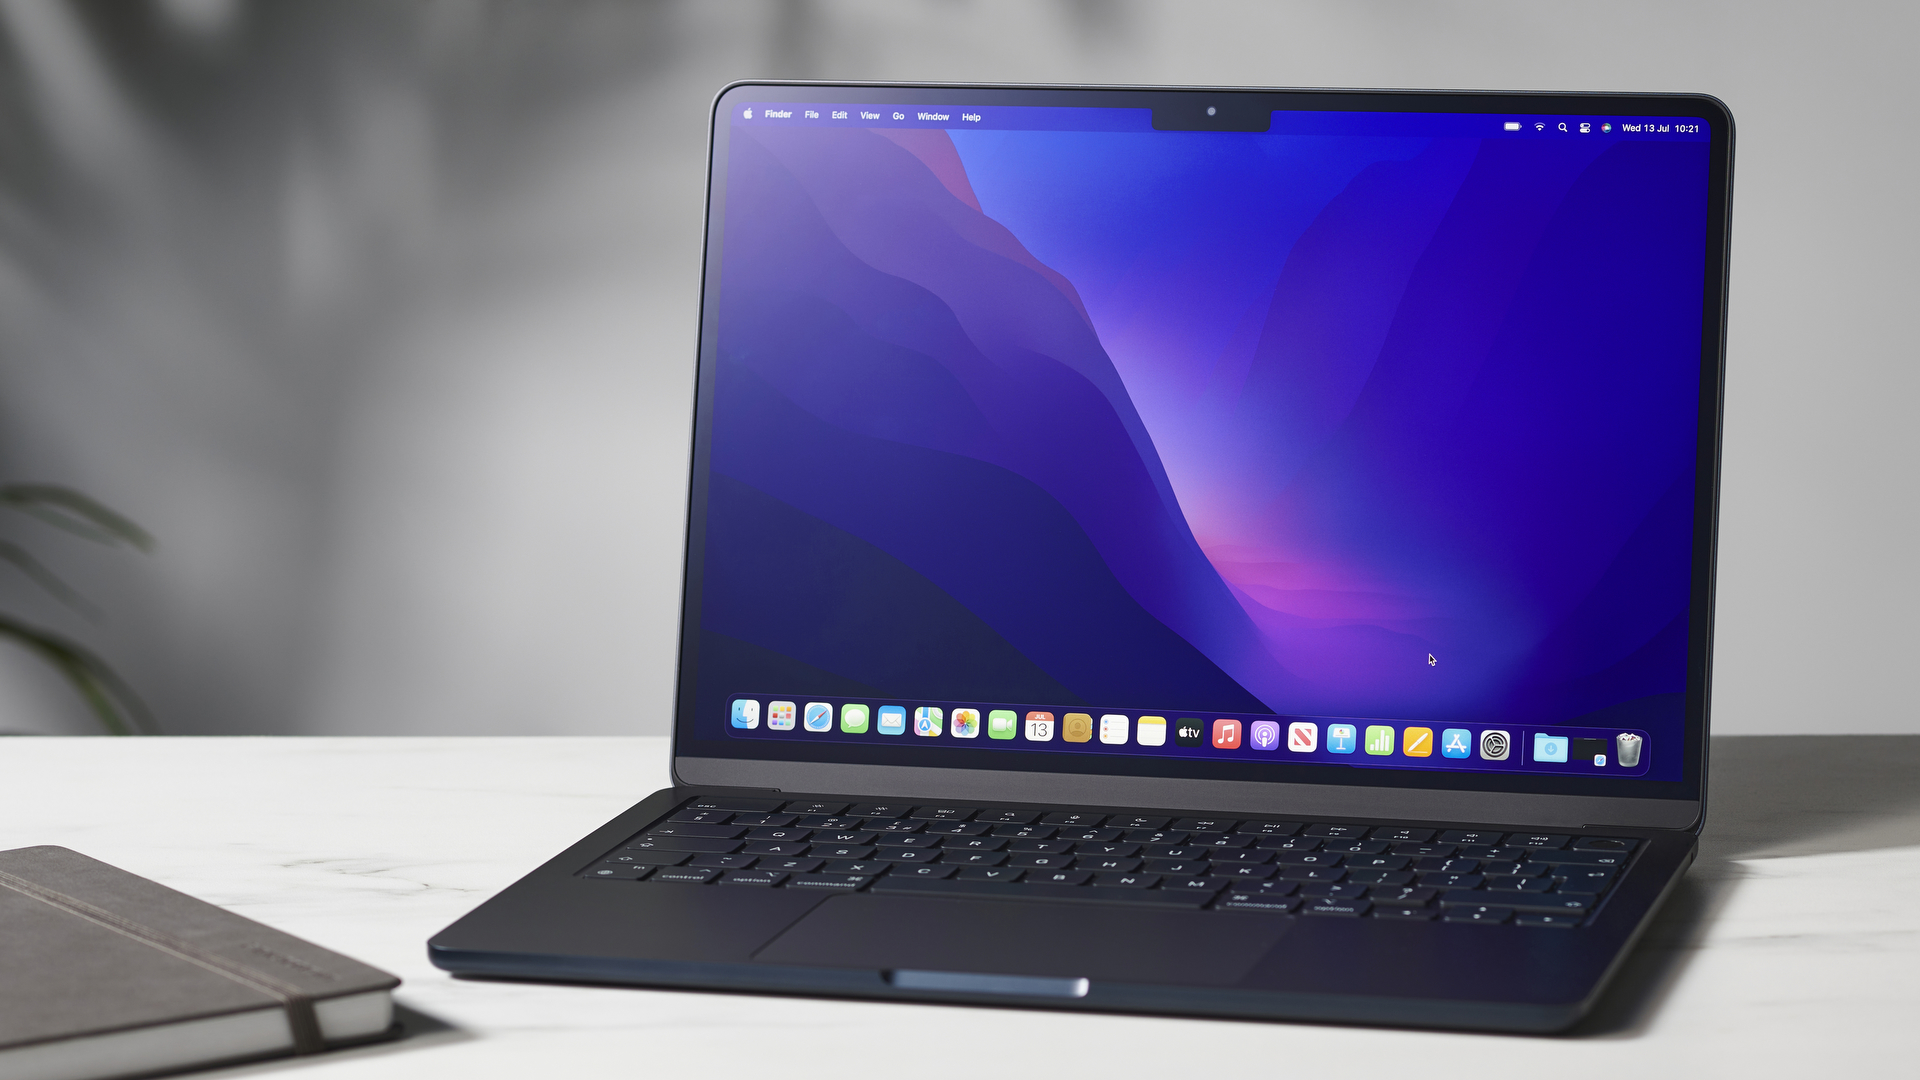 macbook air m2 midnight display is one of the best laptops in 2022